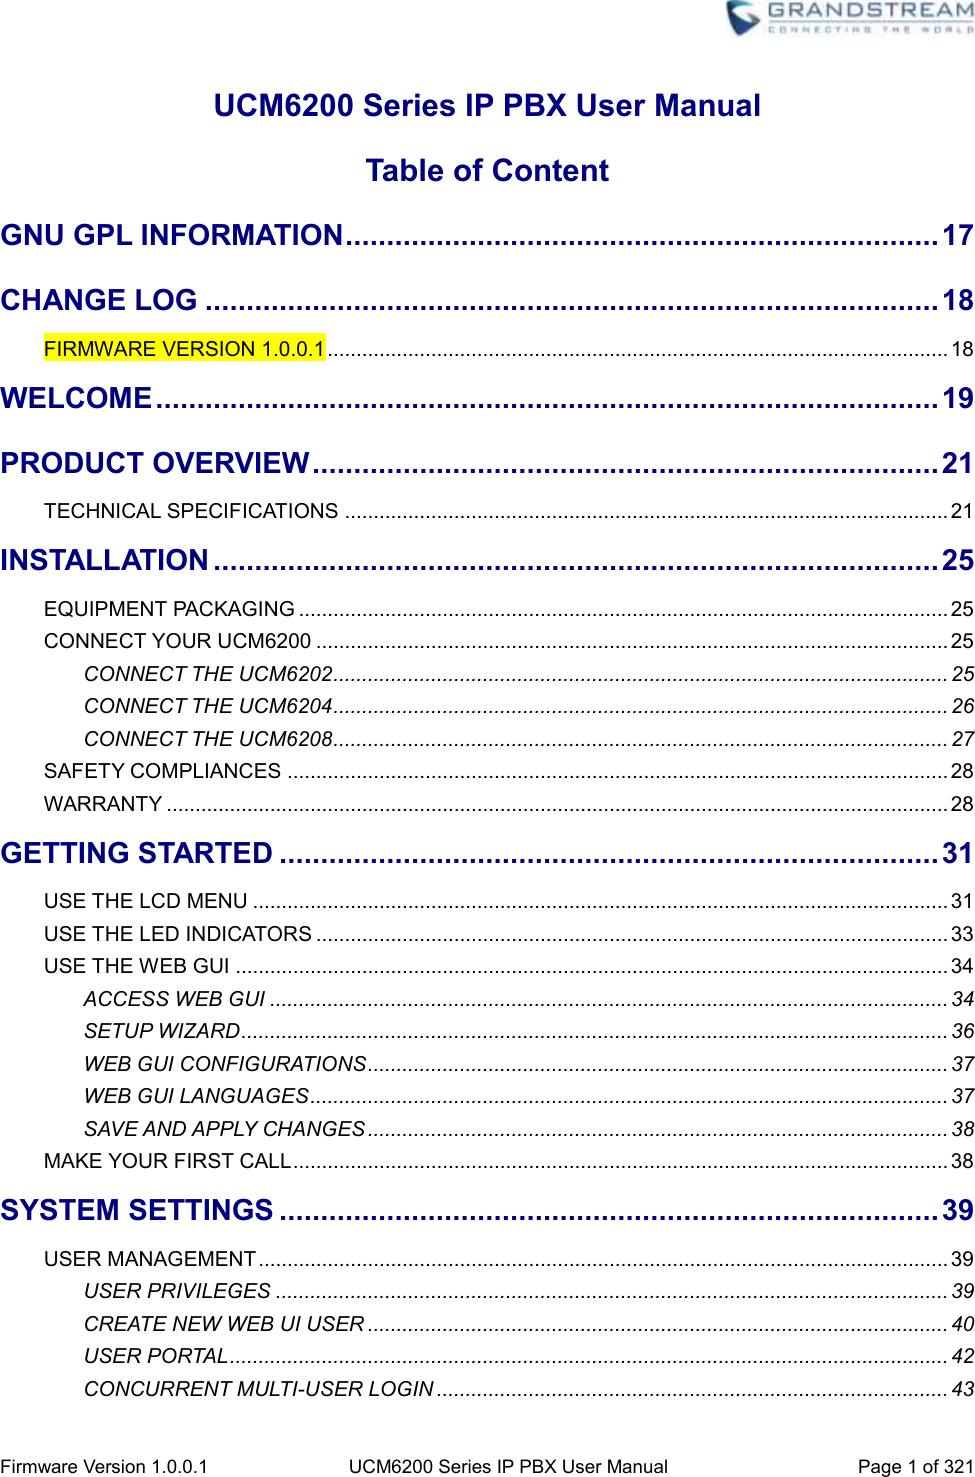  Firmware Version 1.0.0.1 UCM6200 Series IP PBX User Manual Page 1 of 321    UCM6200 Series IP PBX User Manual Table of Content GNU GPL INFORMATION ........................................................................ 17 CHANGE LOG ......................................................................................... 18 FIRMWARE VERSION 1.0.0.1 ............................................................................................................ 18 WELCOME ............................................................................................... 19 PRODUCT OVERVIEW ............................................................................ 21 TECHNICAL SPECIFICATIONS ......................................................................................................... 21 INSTALLATION ........................................................................................ 25 EQUIPMENT PACKAGING ................................................................................................................. 25 CONNECT YOUR UCM6200 .............................................................................................................. 25 CONNECT THE UCM6202 ........................................................................................................... 25 CONNECT THE UCM6204 ........................................................................................................... 26 CONNECT THE UCM6208 ........................................................................................................... 27 SAFETY COMPLIANCES ................................................................................................................... 28 WARRANTY ........................................................................................................................................ 28 GETTING STARTED ................................................................................ 31 USE THE LCD MENU ......................................................................................................................... 31 USE THE LED INDICATORS .............................................................................................................. 33 USE THE WEB GUI ............................................................................................................................ 34 ACCESS WEB GUI ...................................................................................................................... 34 SETUP WIZARD ........................................................................................................................... 36 WEB GUI CONFIGURATIONS ..................................................................................................... 37 WEB GUI LANGUAGES ............................................................................................................... 37 SAVE AND APPLY CHANGES ..................................................................................................... 38 MAKE YOUR FIRST CALL .................................................................................................................. 38 SYSTEM SETTINGS ................................................................................ 39 USER MANAGEMENT ........................................................................................................................ 39 USER PRIVILEGES ..................................................................................................................... 39 CREATE NEW WEB UI USER ..................................................................................................... 40 USER PORTAL ............................................................................................................................. 42 CONCURRENT MULTI-USER LOGIN ......................................................................................... 43 